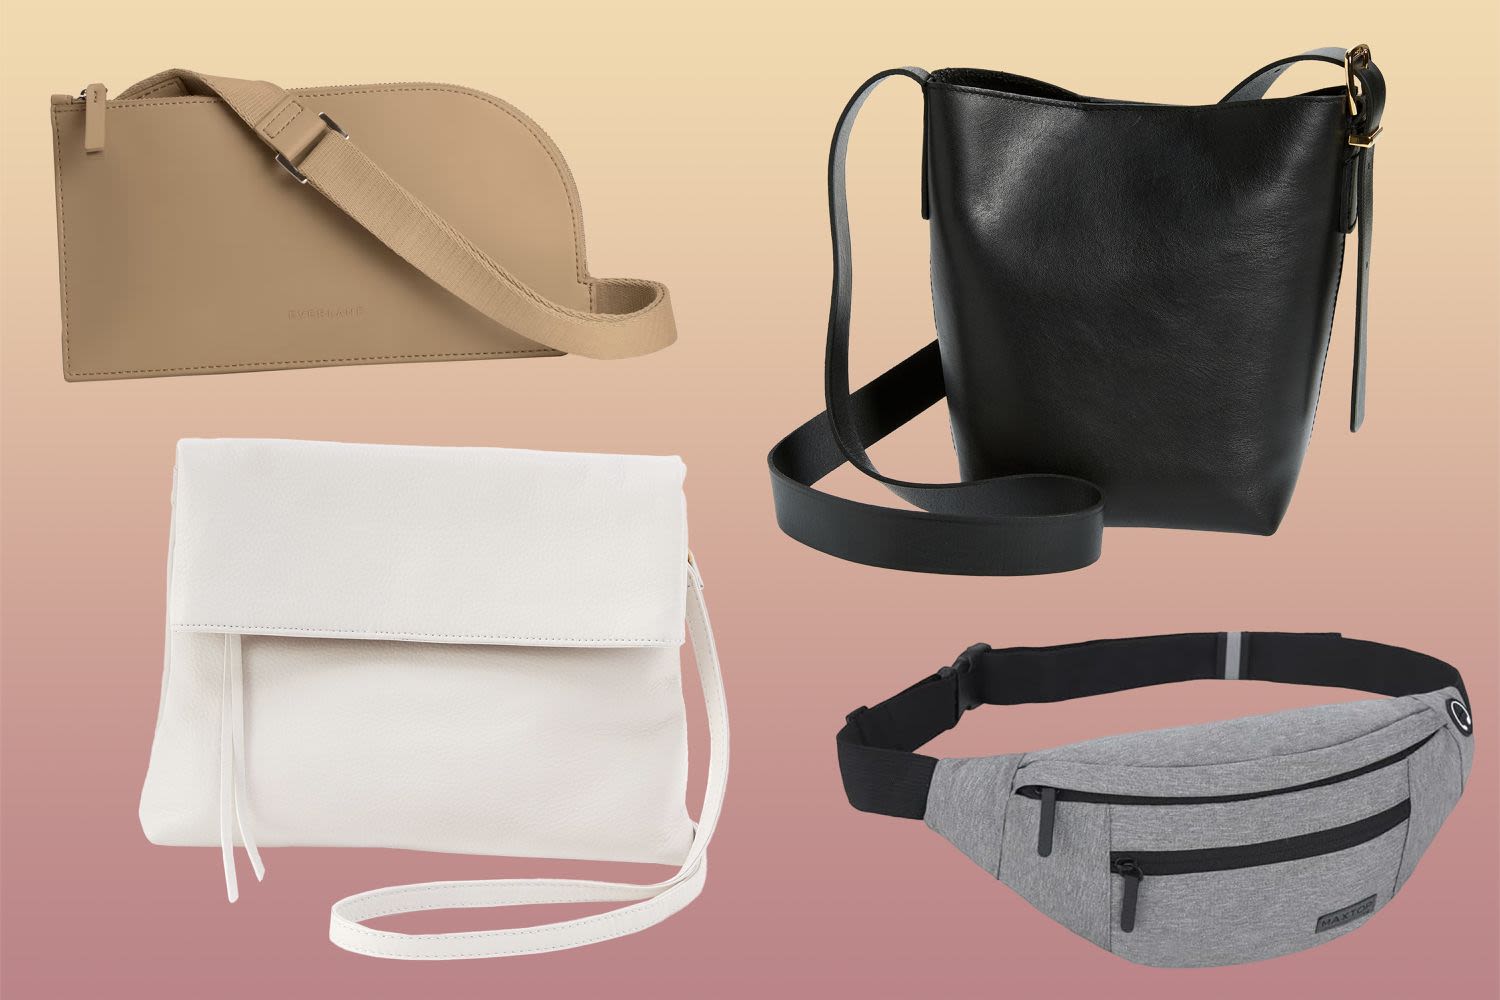 Travel Light With the 15 Best Sleek and Stylish Crossbody Purses, Sling Bags, and More — From $14